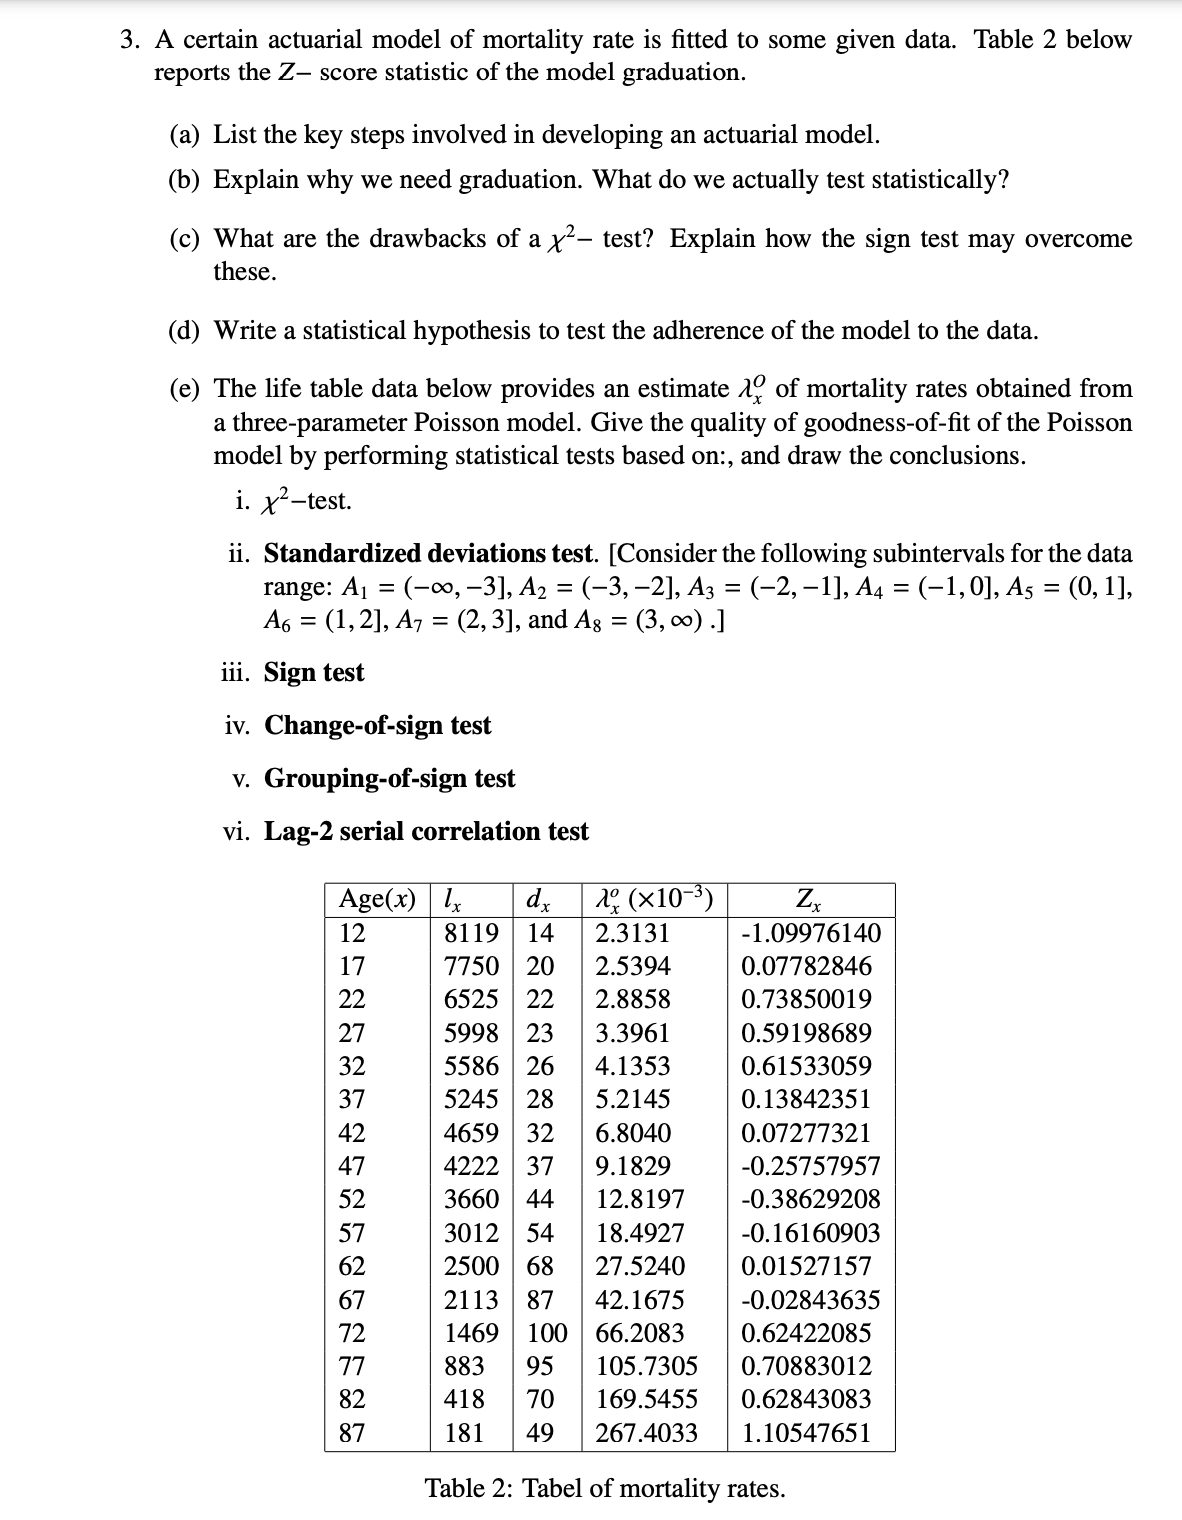 3. A certain actuarial model of mortality rate is fitted to some given data. Table 2 below
reports the Z-score statistic of the model graduation.
(a) List the key steps involved in developing an actuarial model.
(b) Explain why we need graduation. What do we actually test statistically?
(c) What are the drawbacks of a x²- test? Explain how the sign test may overcome
these.
(d) Write a statistical hypothesis to test the adherence of the model to the data.
(e) The life table data below provides an estimate of mortality rates obtained from
a three-parameter Poisson model. Give the quality of goodness-of-fit of the Poisson
model by performing statistical tests based on:, and draw the conclusions.
i. x²-test.
ii. Standardized deviations test. [Consider the following subintervals for the data
range: A₁ = (-∞, −3], A₂ = (−3,−2], A3 = (−2, −1], A4 = (–1, 0], A5 = (0, 1],
A6 = (1, 2], A7 = (2, 3], and Ag = (3, ∞).]
iii. Sign test
iv. Change-of-sign test
v. Grouping-of-sign test
vi. Lag-2 serial correlation test
Age(x) lx dx
λº (x10-³)
Zx
12
8119 14
2.3131
-1.09976140
7750 20 2.5394
0.07782846
0.73850019
6525 22 2.8858
5998 23 3.3961
0.59198689
5586 26
0.61533059
4.1353
5.2145
5245 28
0.13842351
4659 32
6.8040
0.07277321
4222 37
9.1829
-0.25757957
3660 44
12.8197
-0.38629208
3012 54
18.4927
-0.16160903
2500 68
27.5240
0.01527157
2113 87 42.1675
-0.02843635
1469 100 66.2083
0.62422085
883 95 105.7305
0.70883012
418 70
169.5455
0.62843083
181 49 267.4033
1.10547651
Table 2: Tabel of mortality rates.
!
17
22
27
32
37
42
47
52
62
67
72
77
82
87